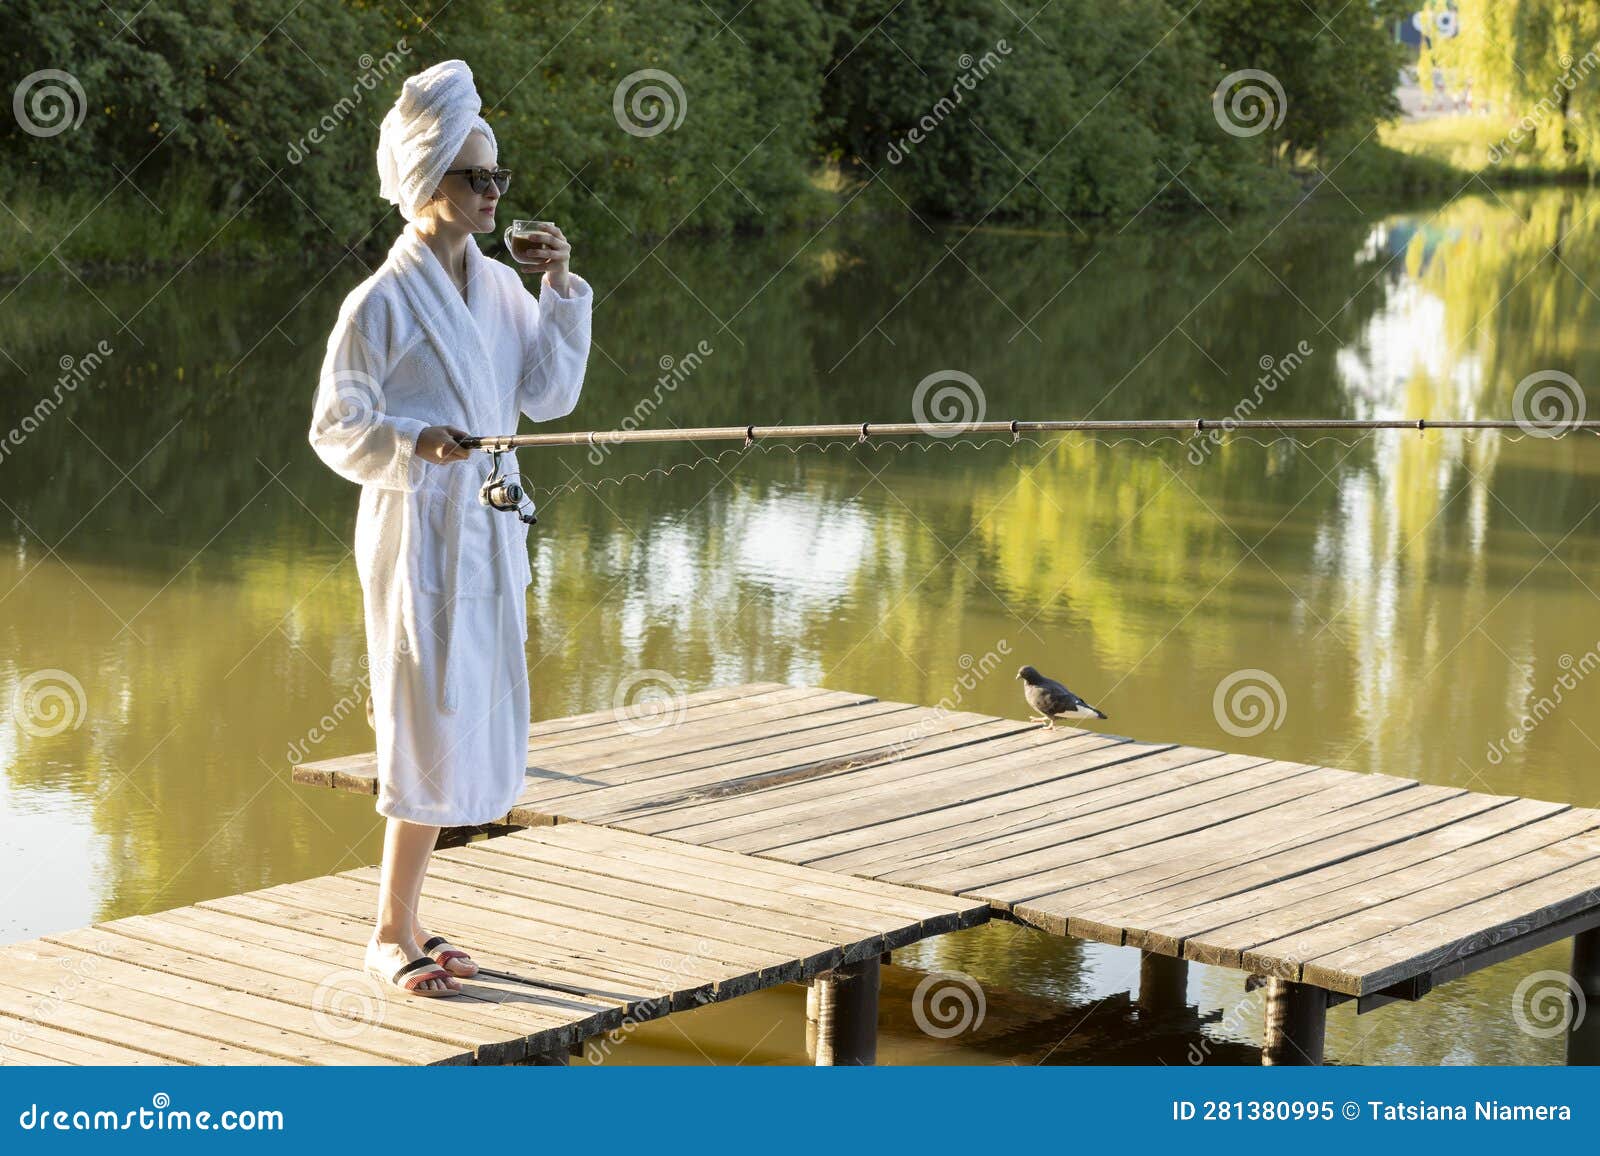 Caucasian Woman in White Robe and Towel is Fishing Holding